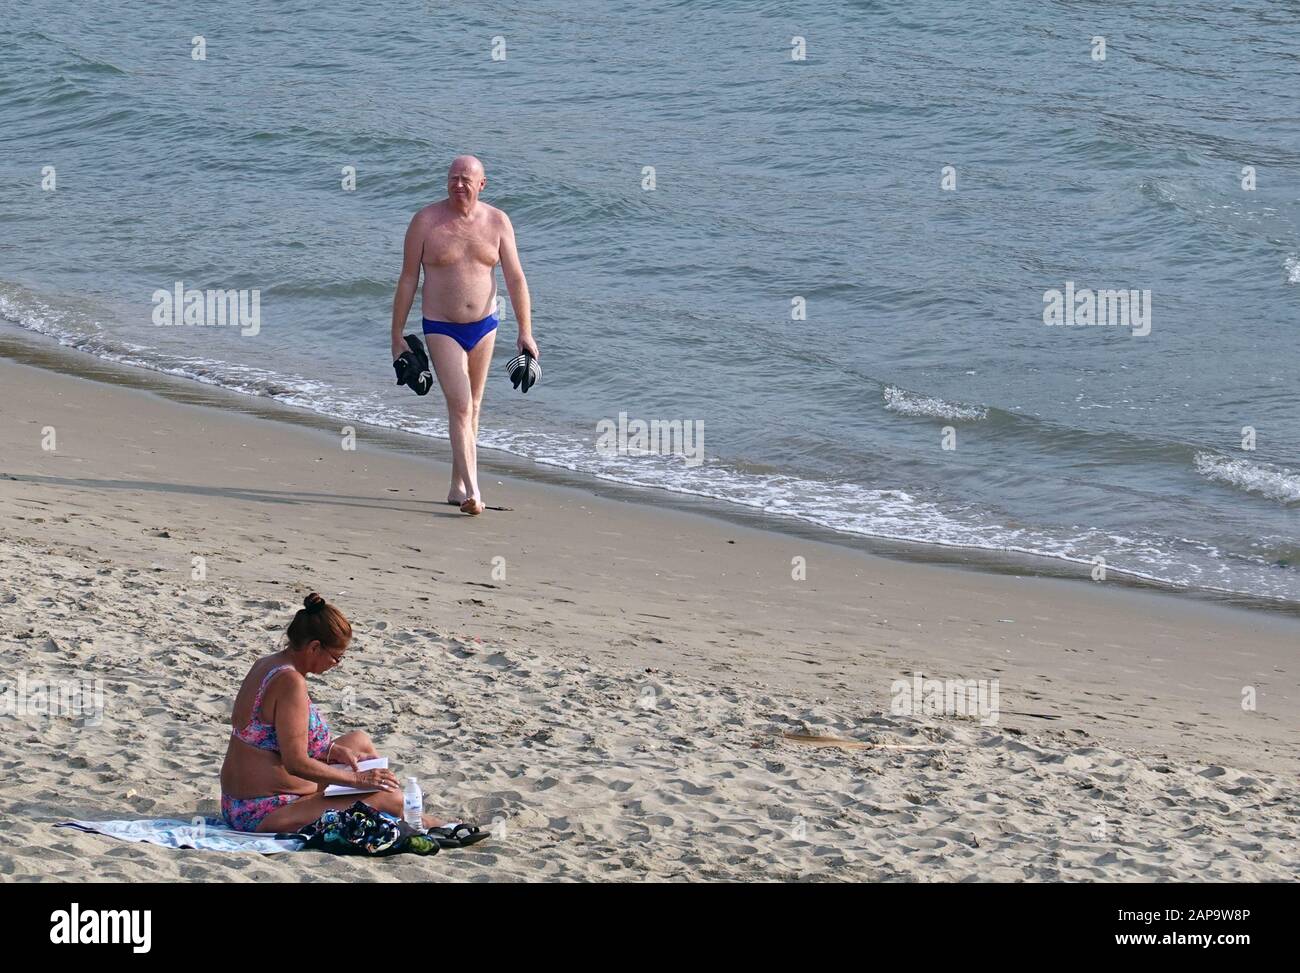 Pattaya, Thailand - December 23, 2019: Bald older man walking on the beach. Woman sits and reading a book. Stock Photo